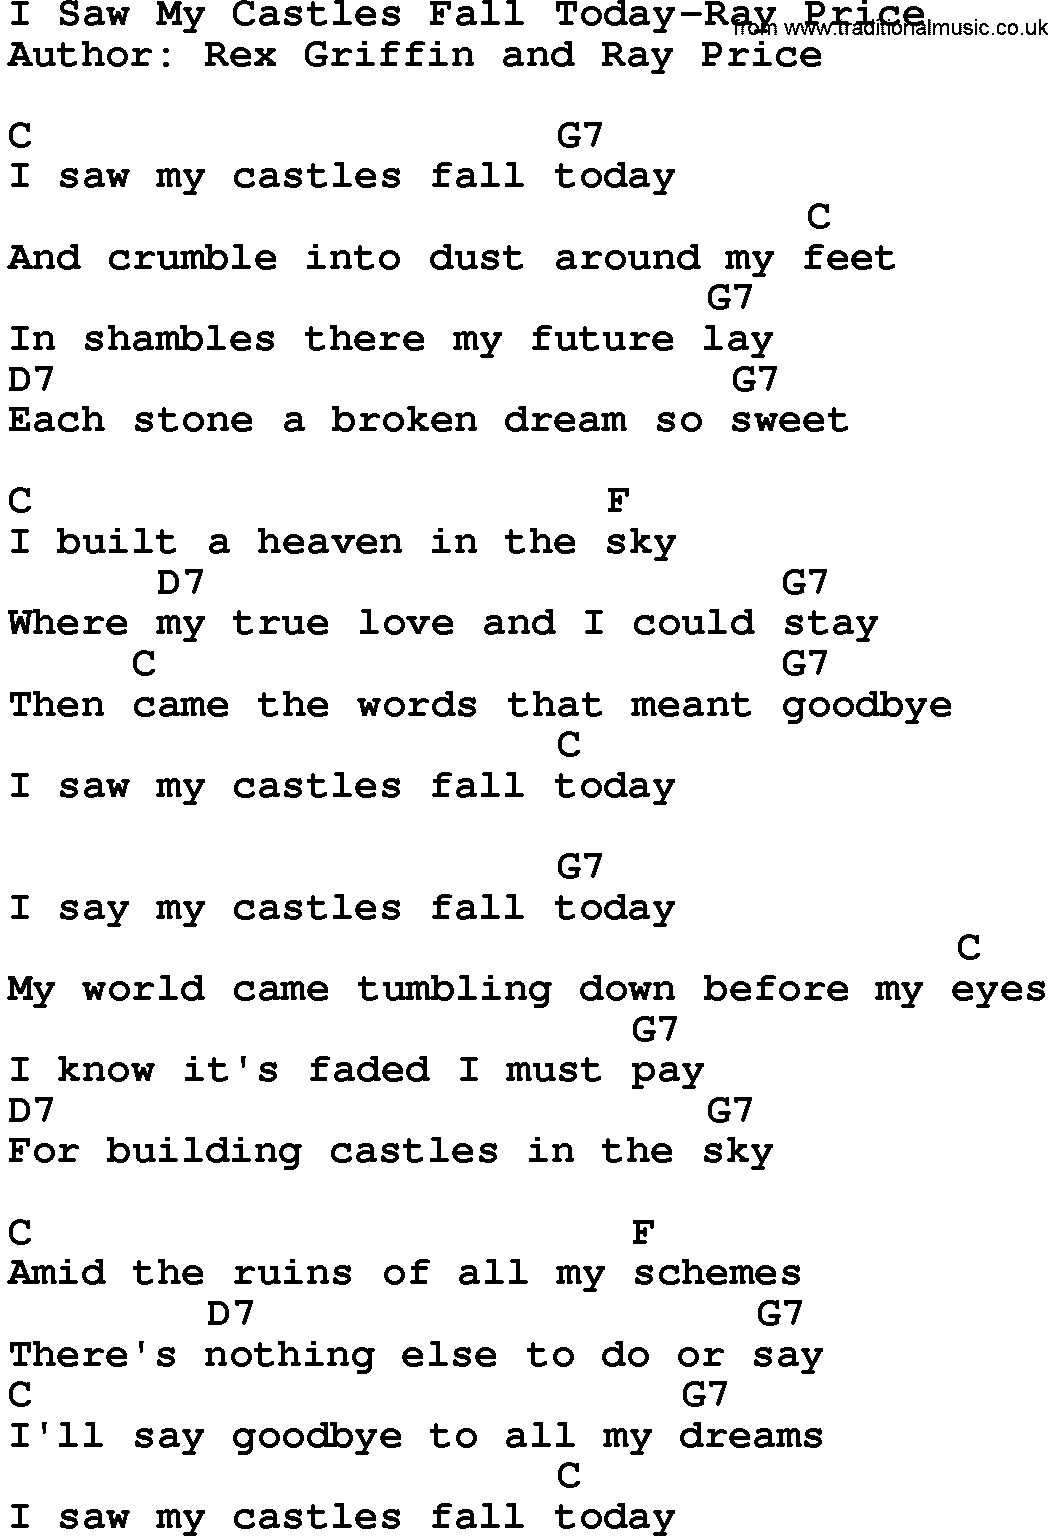 Country music song: I Saw My Castles Fall Today-Ray Price lyrics and chords